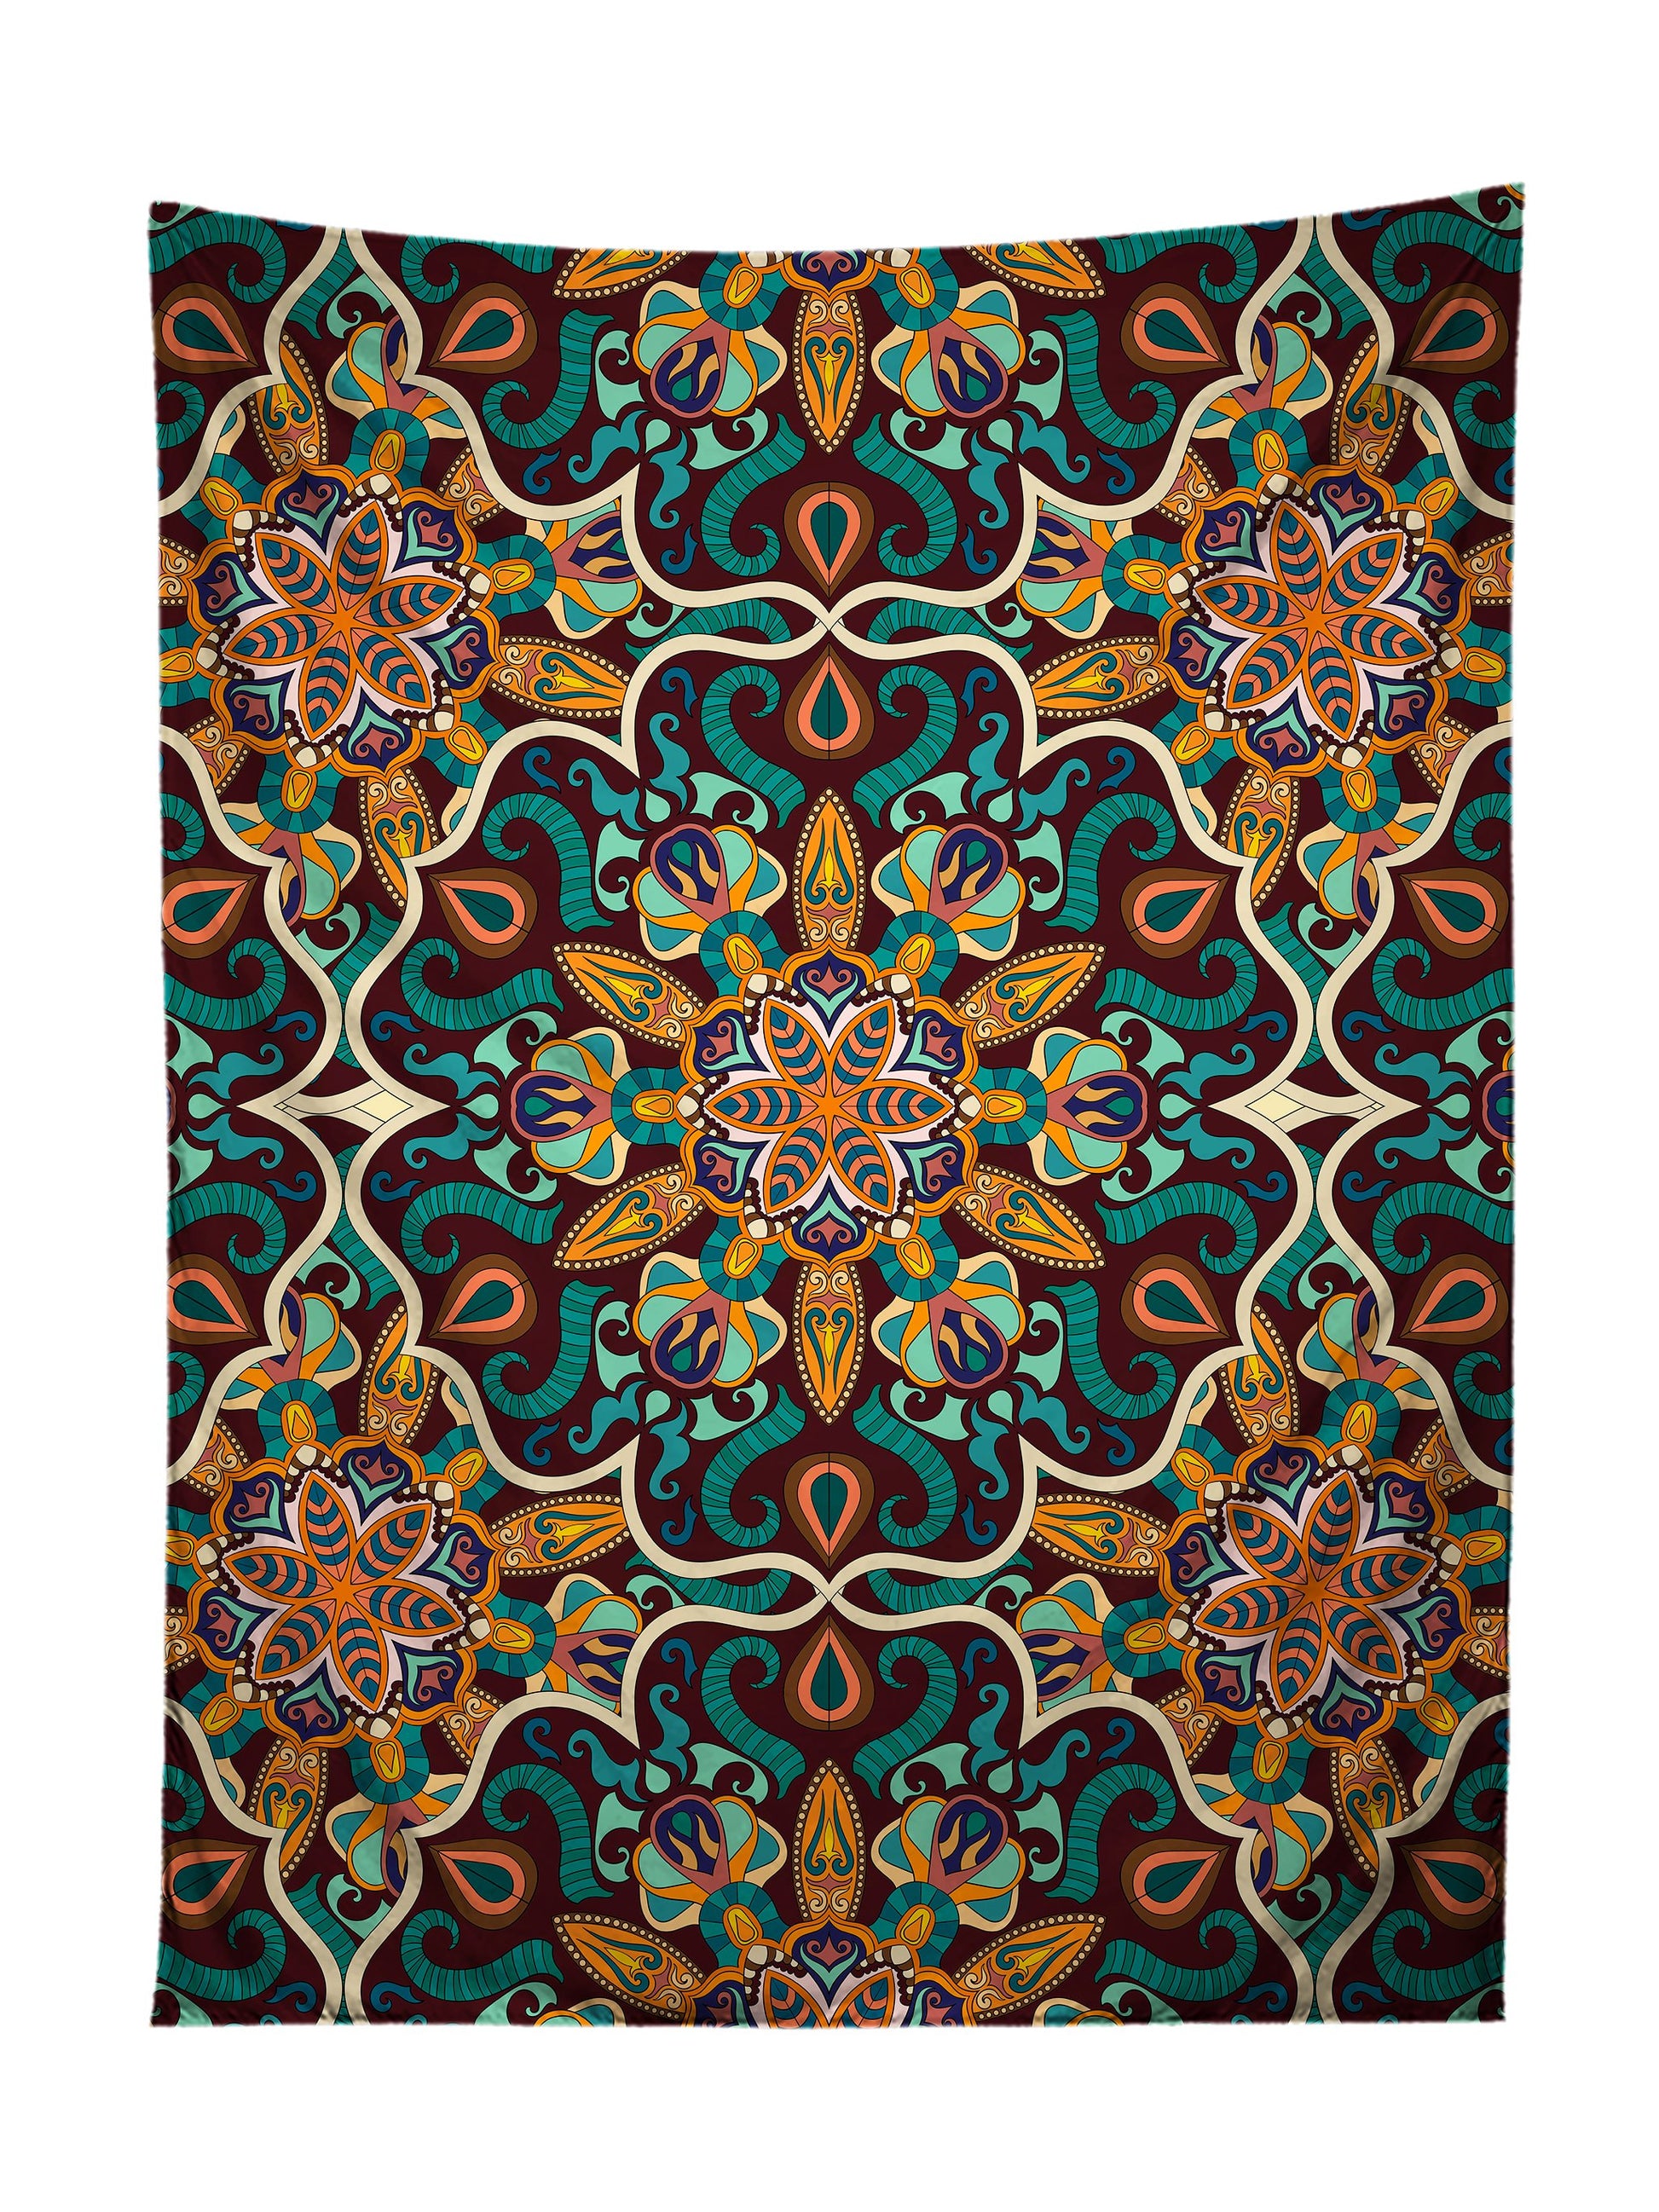 Vertical hanging view of all over print teal & orange mandala tapestry by GratefullyDyed Apparel.